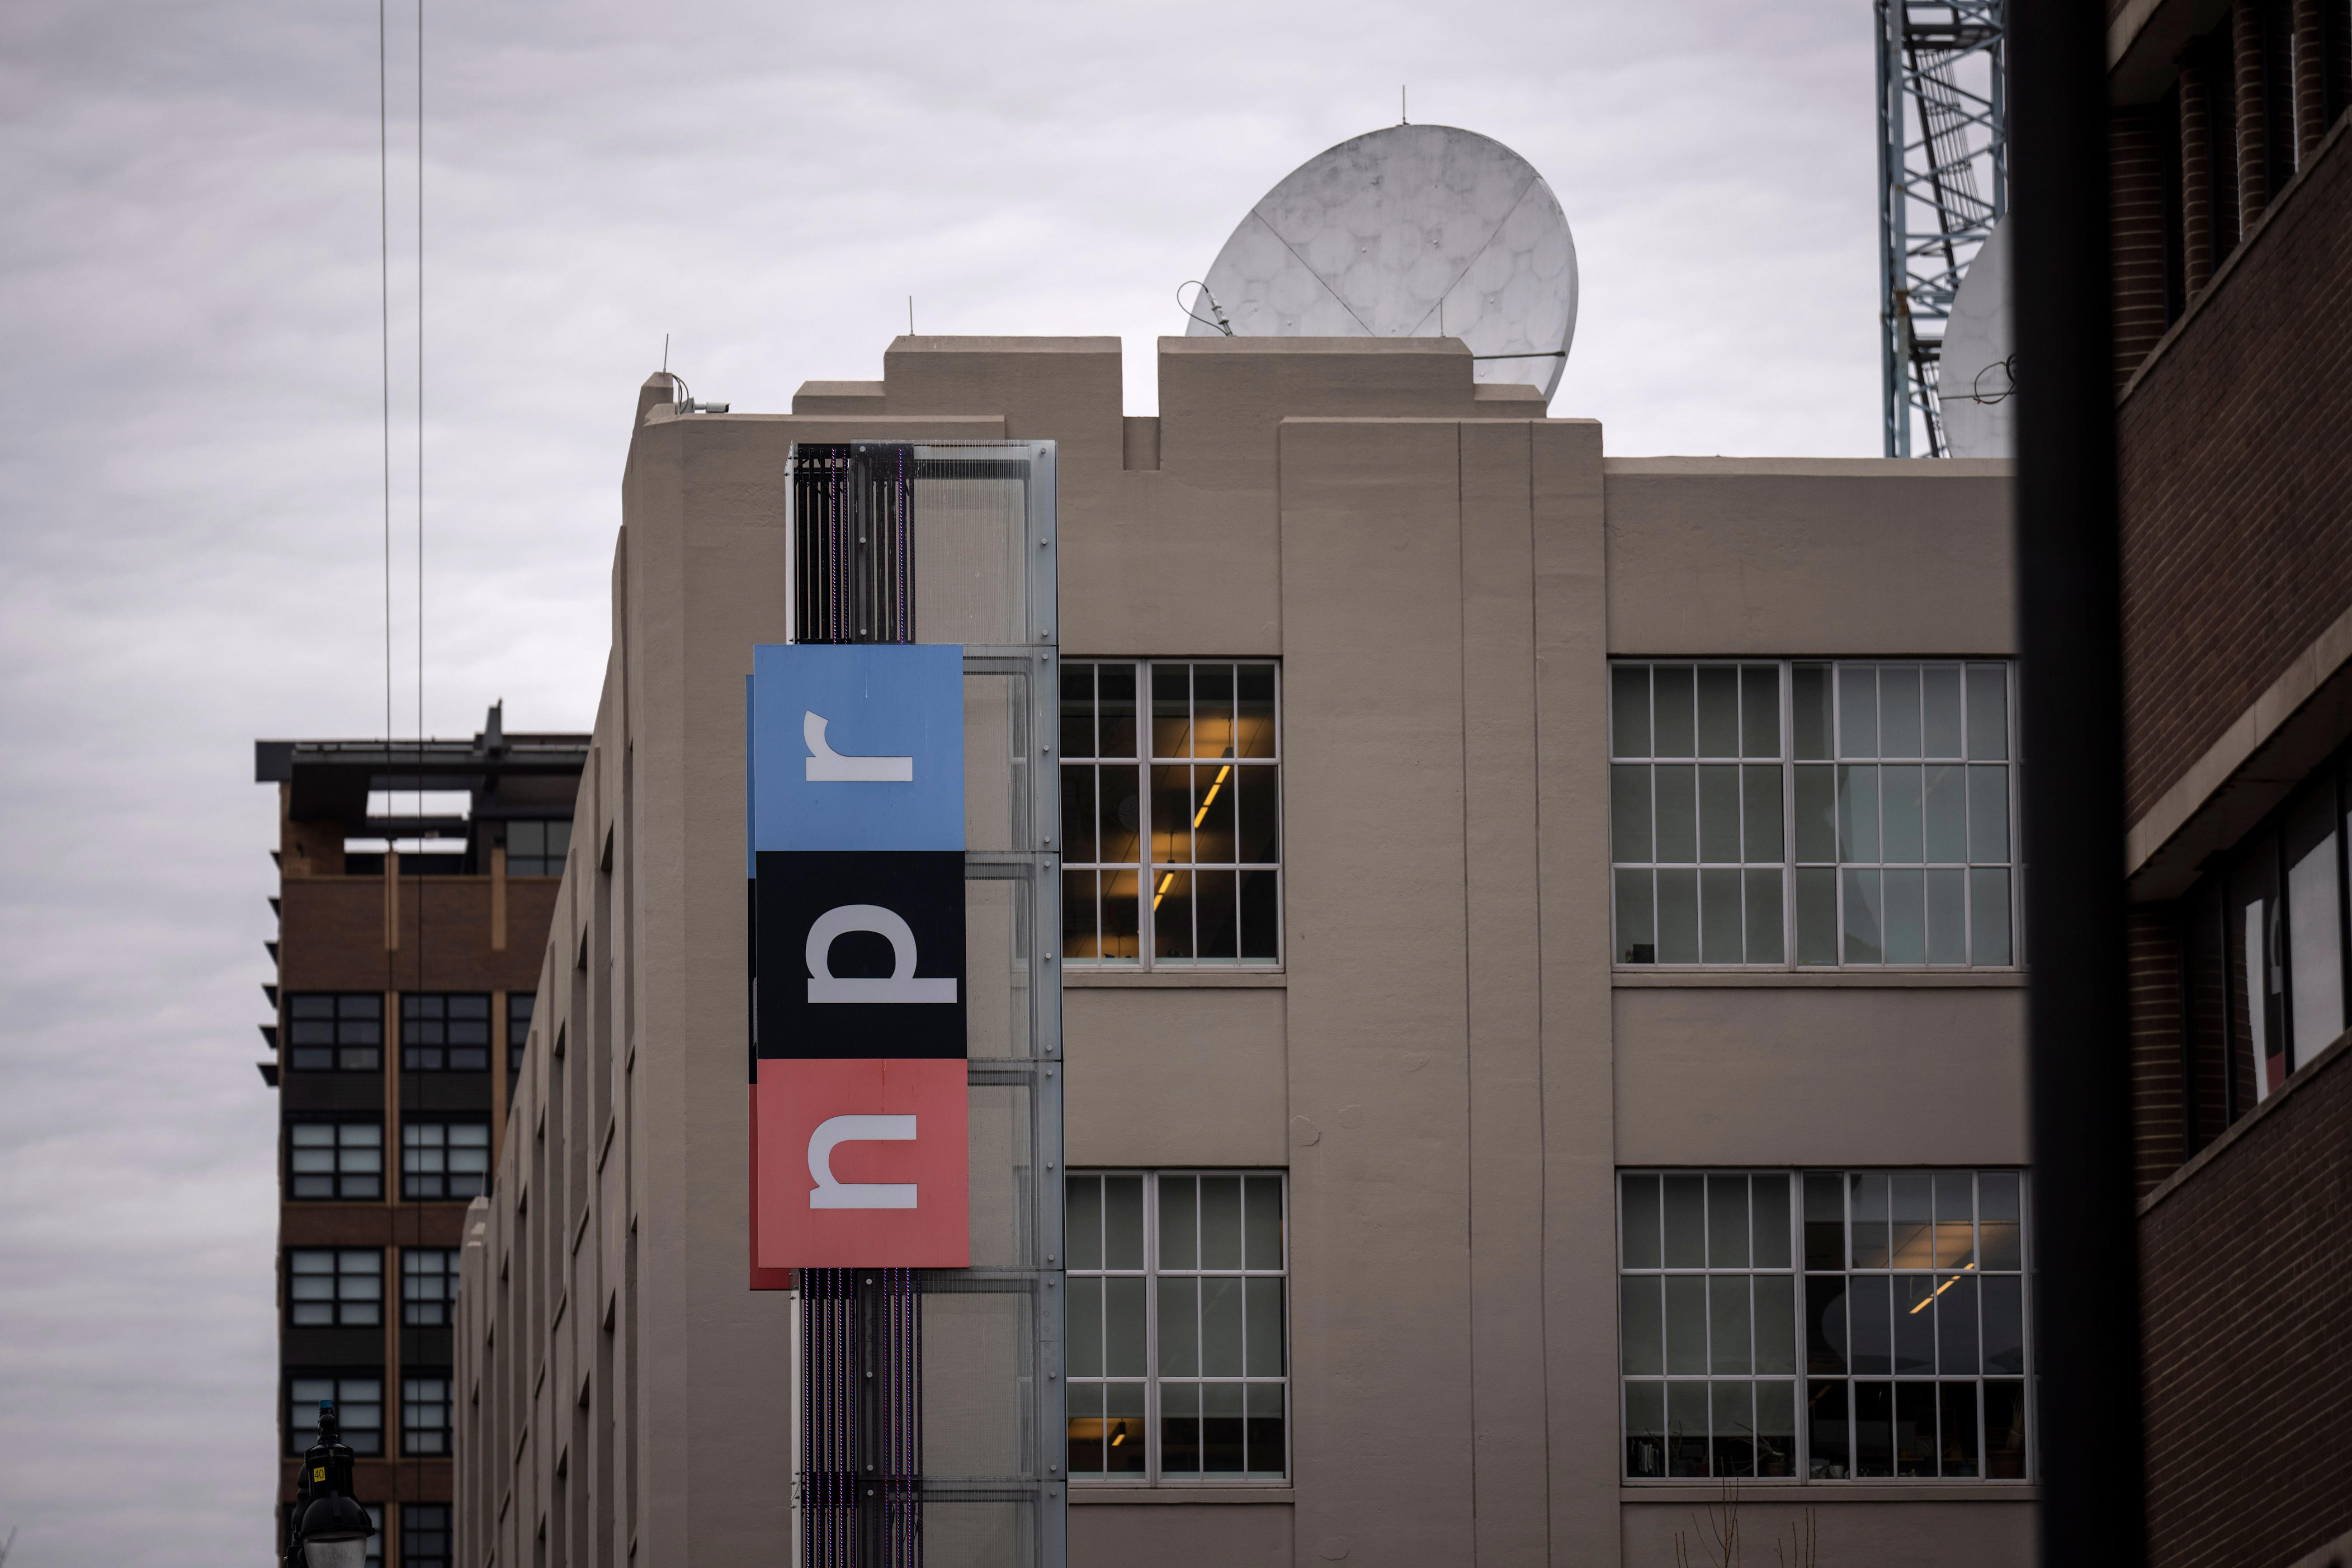 npr editor quit after telling the truth about liberal bias in media. it's time to defund them.